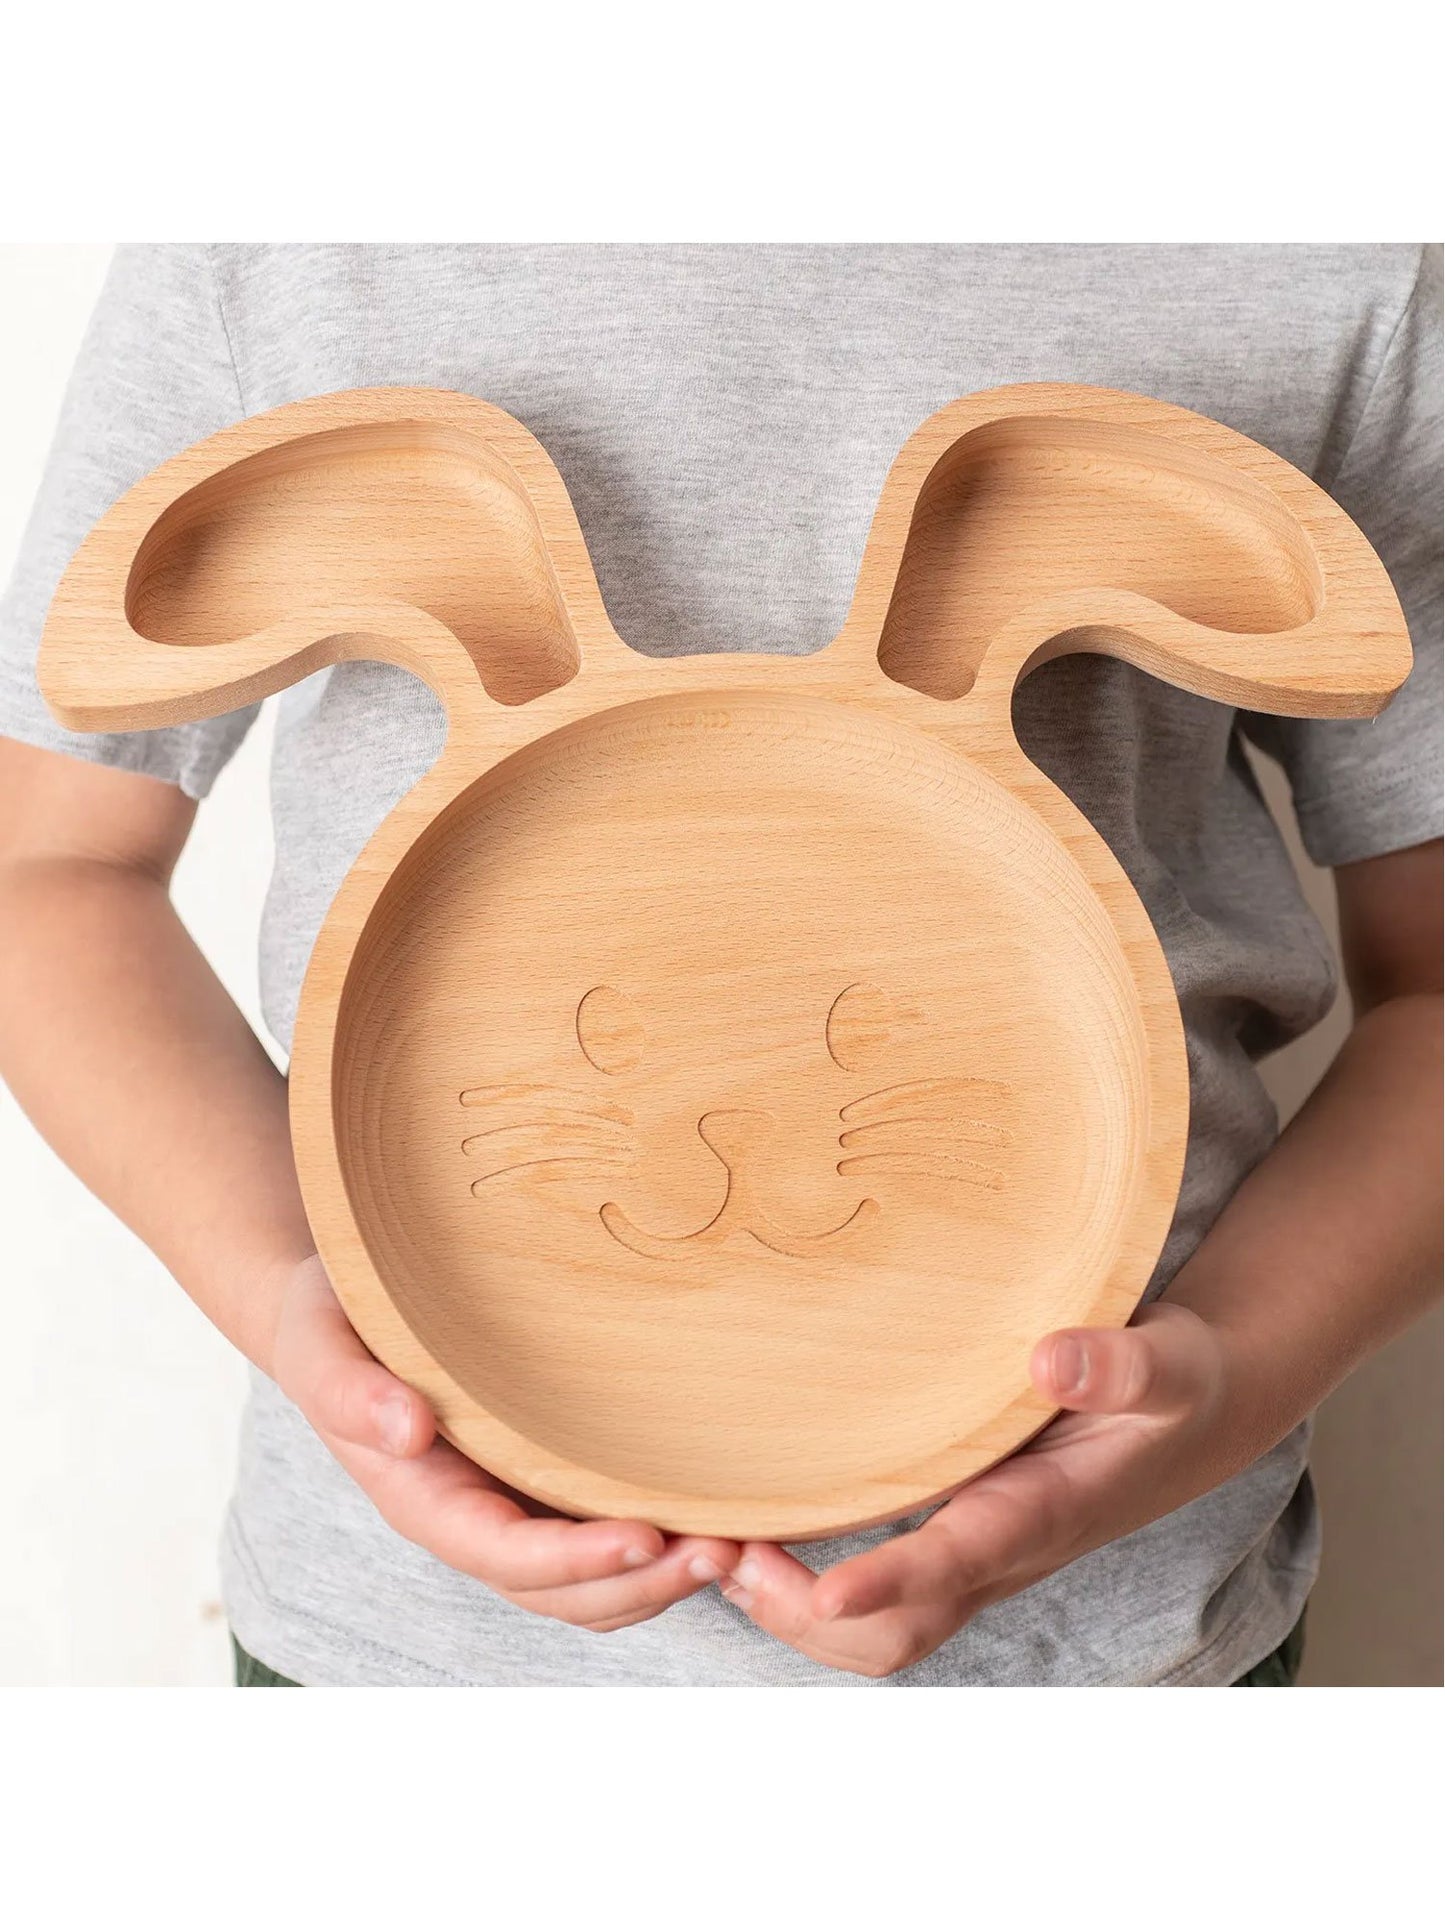 The Wood Life Project EcoFriendly Wooden Rabbit Plate/Kids Plate